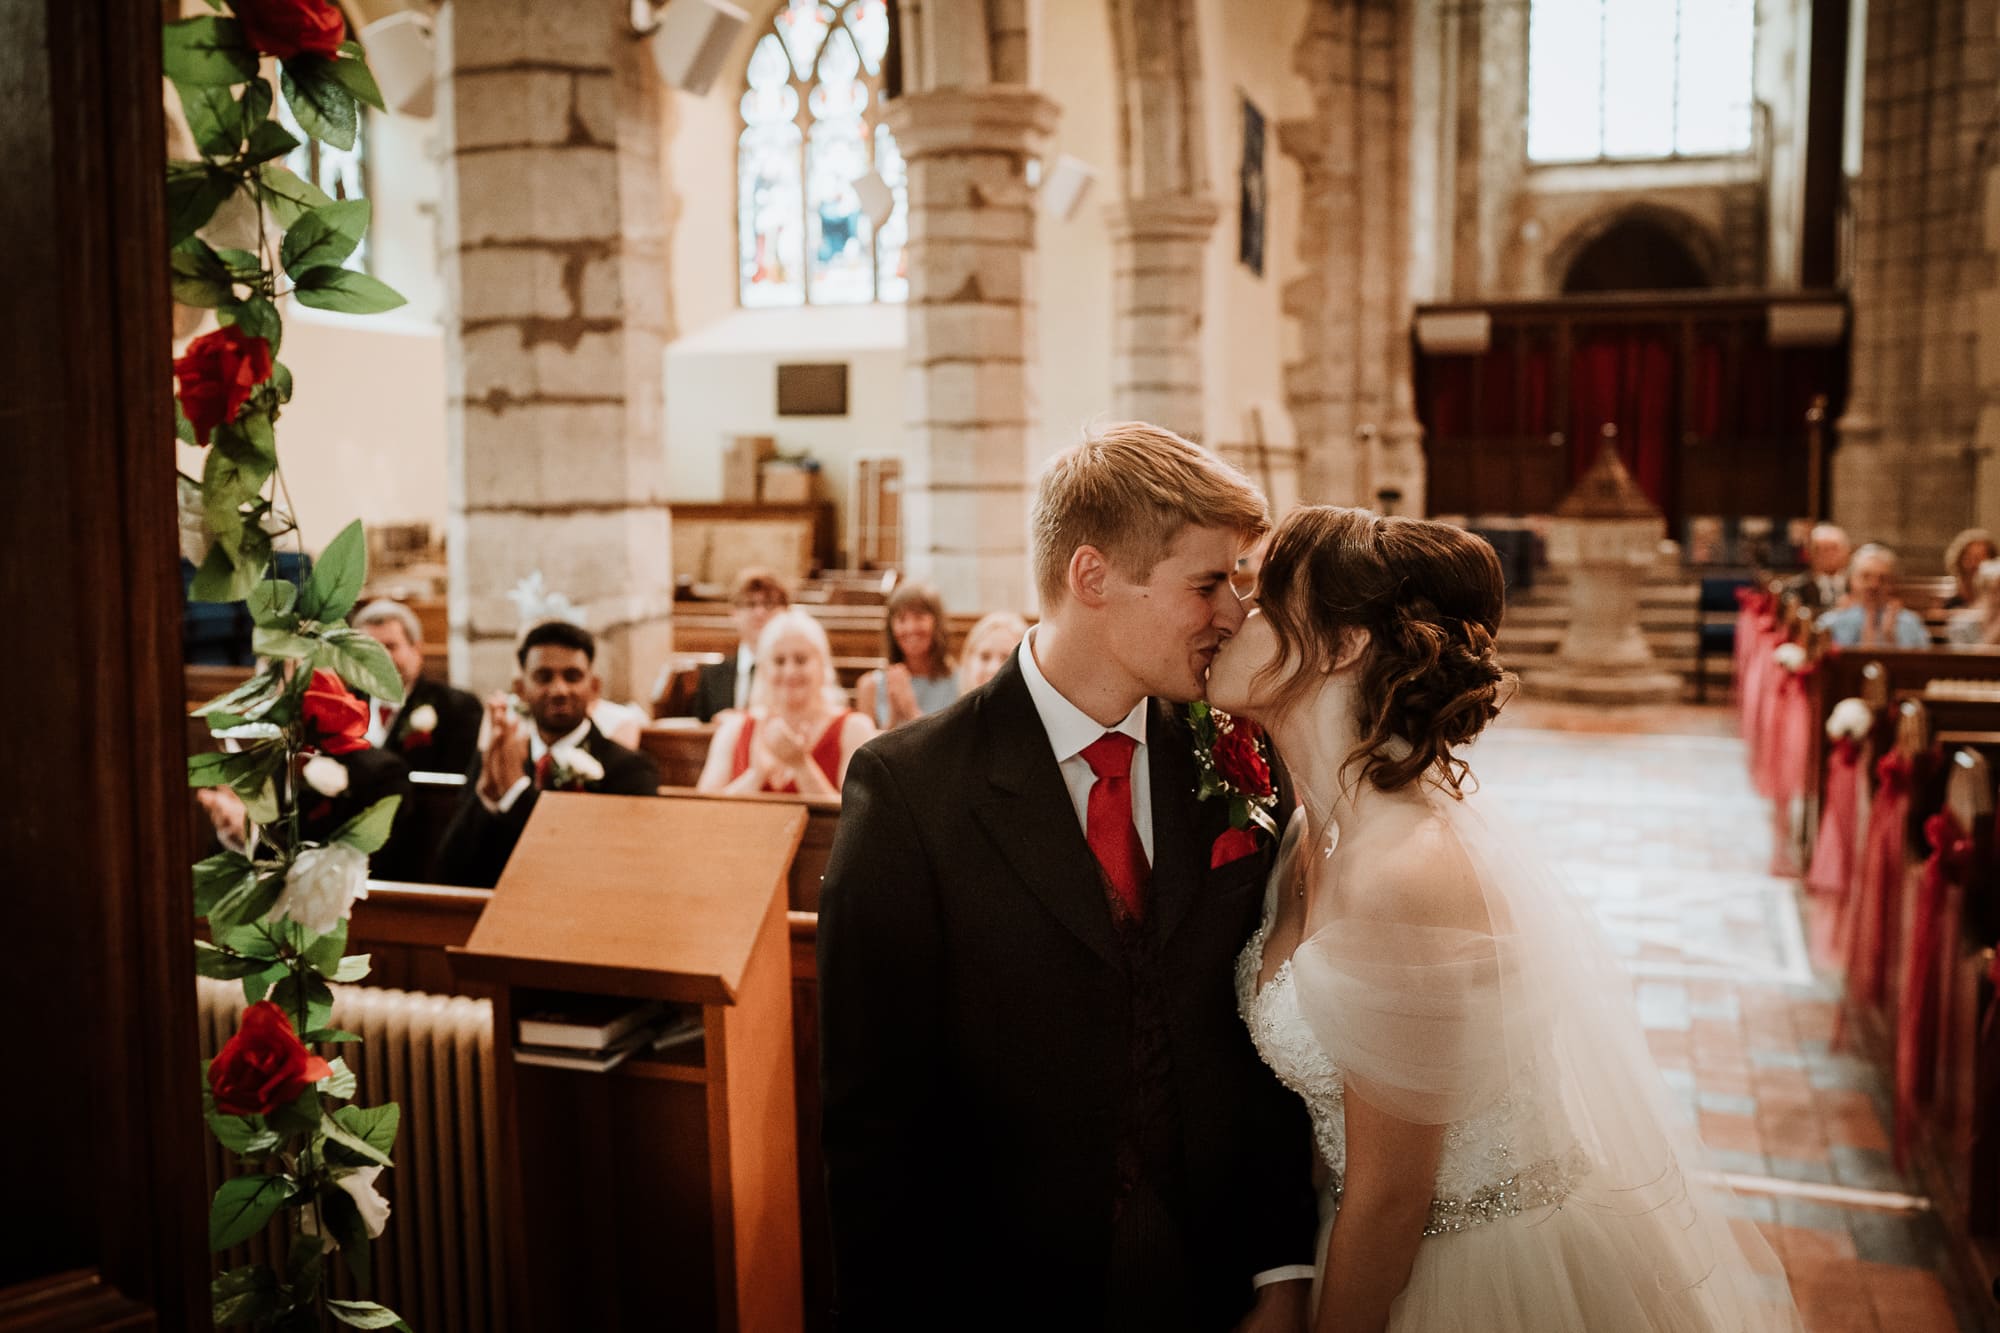 Bride and Groom share their first kiss as husband and wife